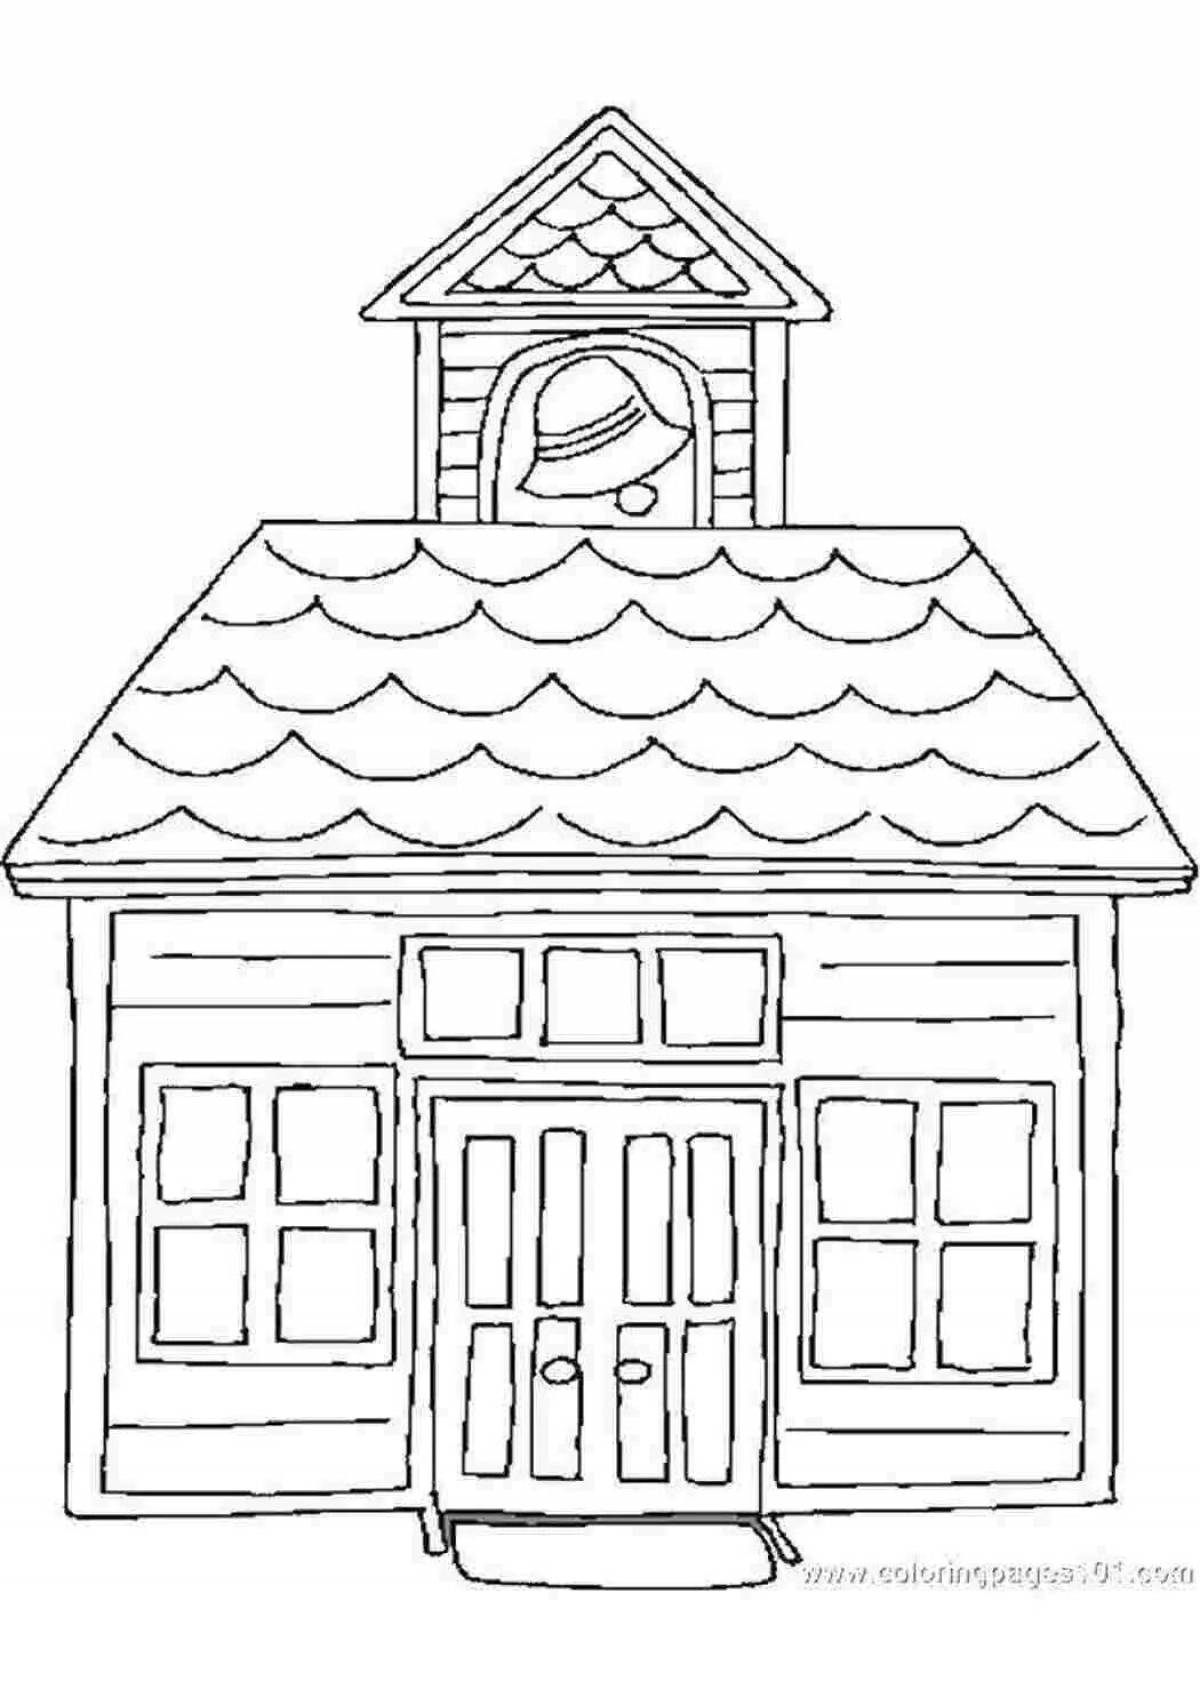 Incredible wooden house coloring book for kids and teens